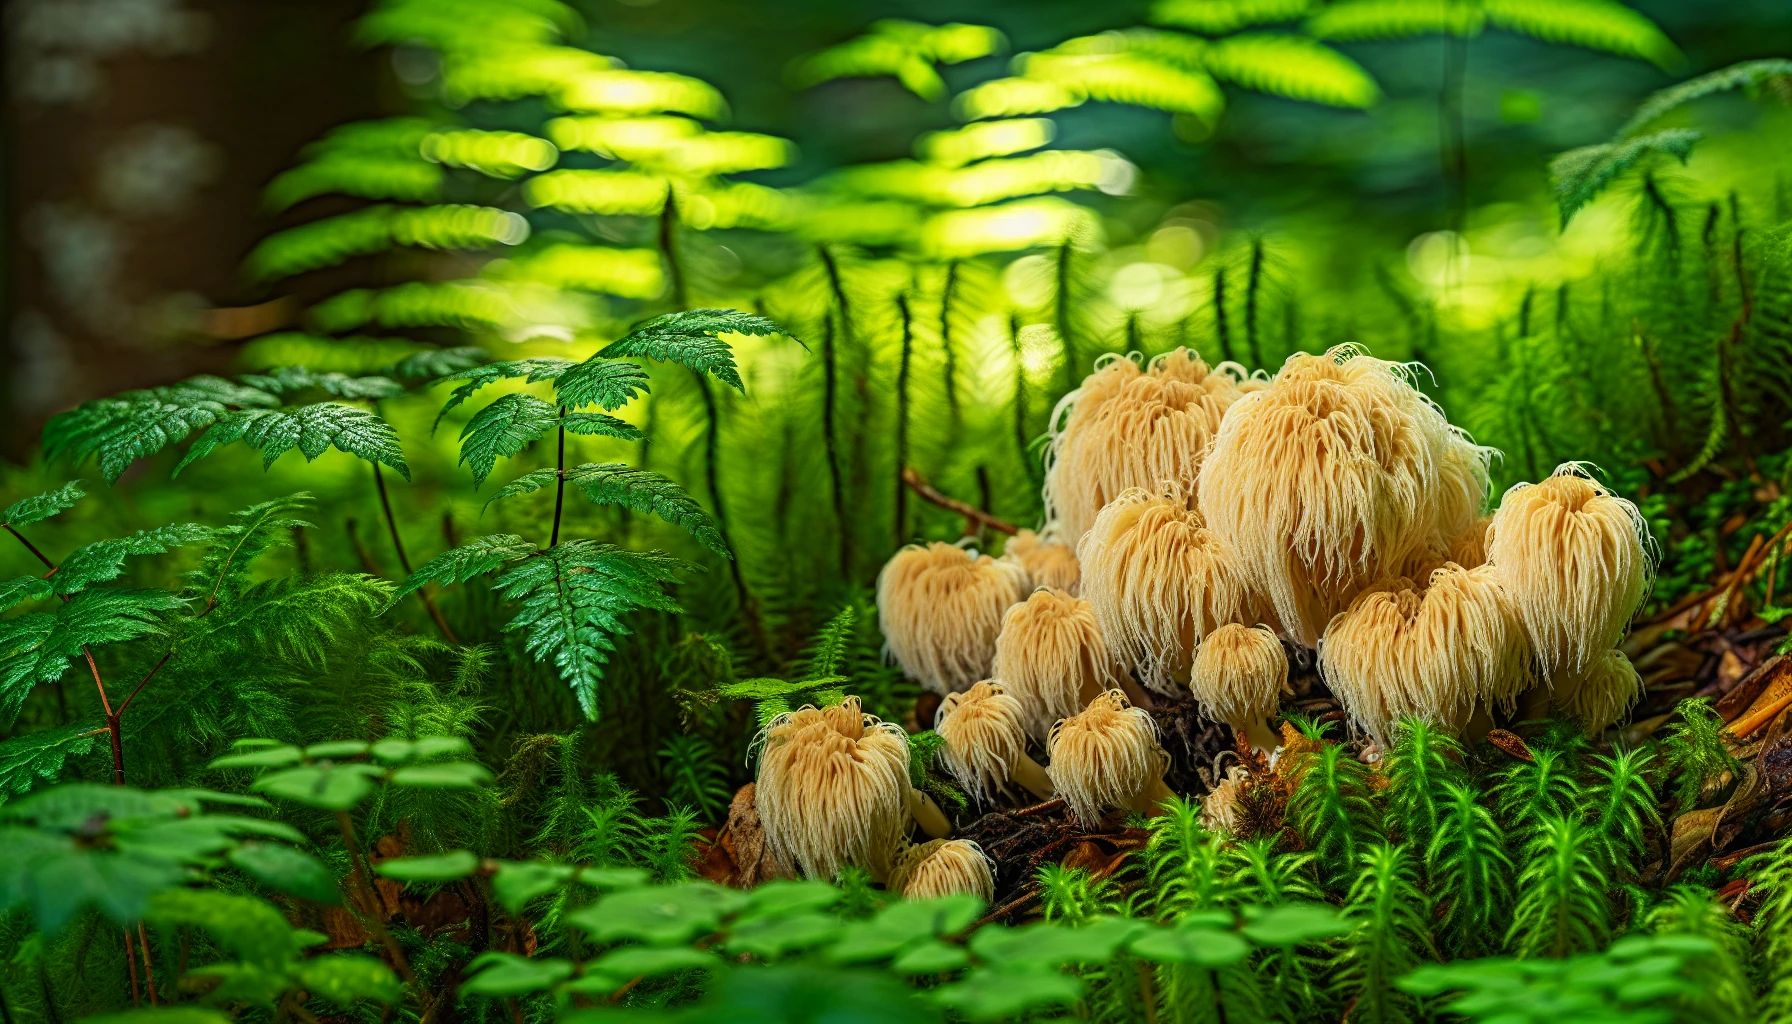 Fresh lion's mane mushrooms in a forest setting